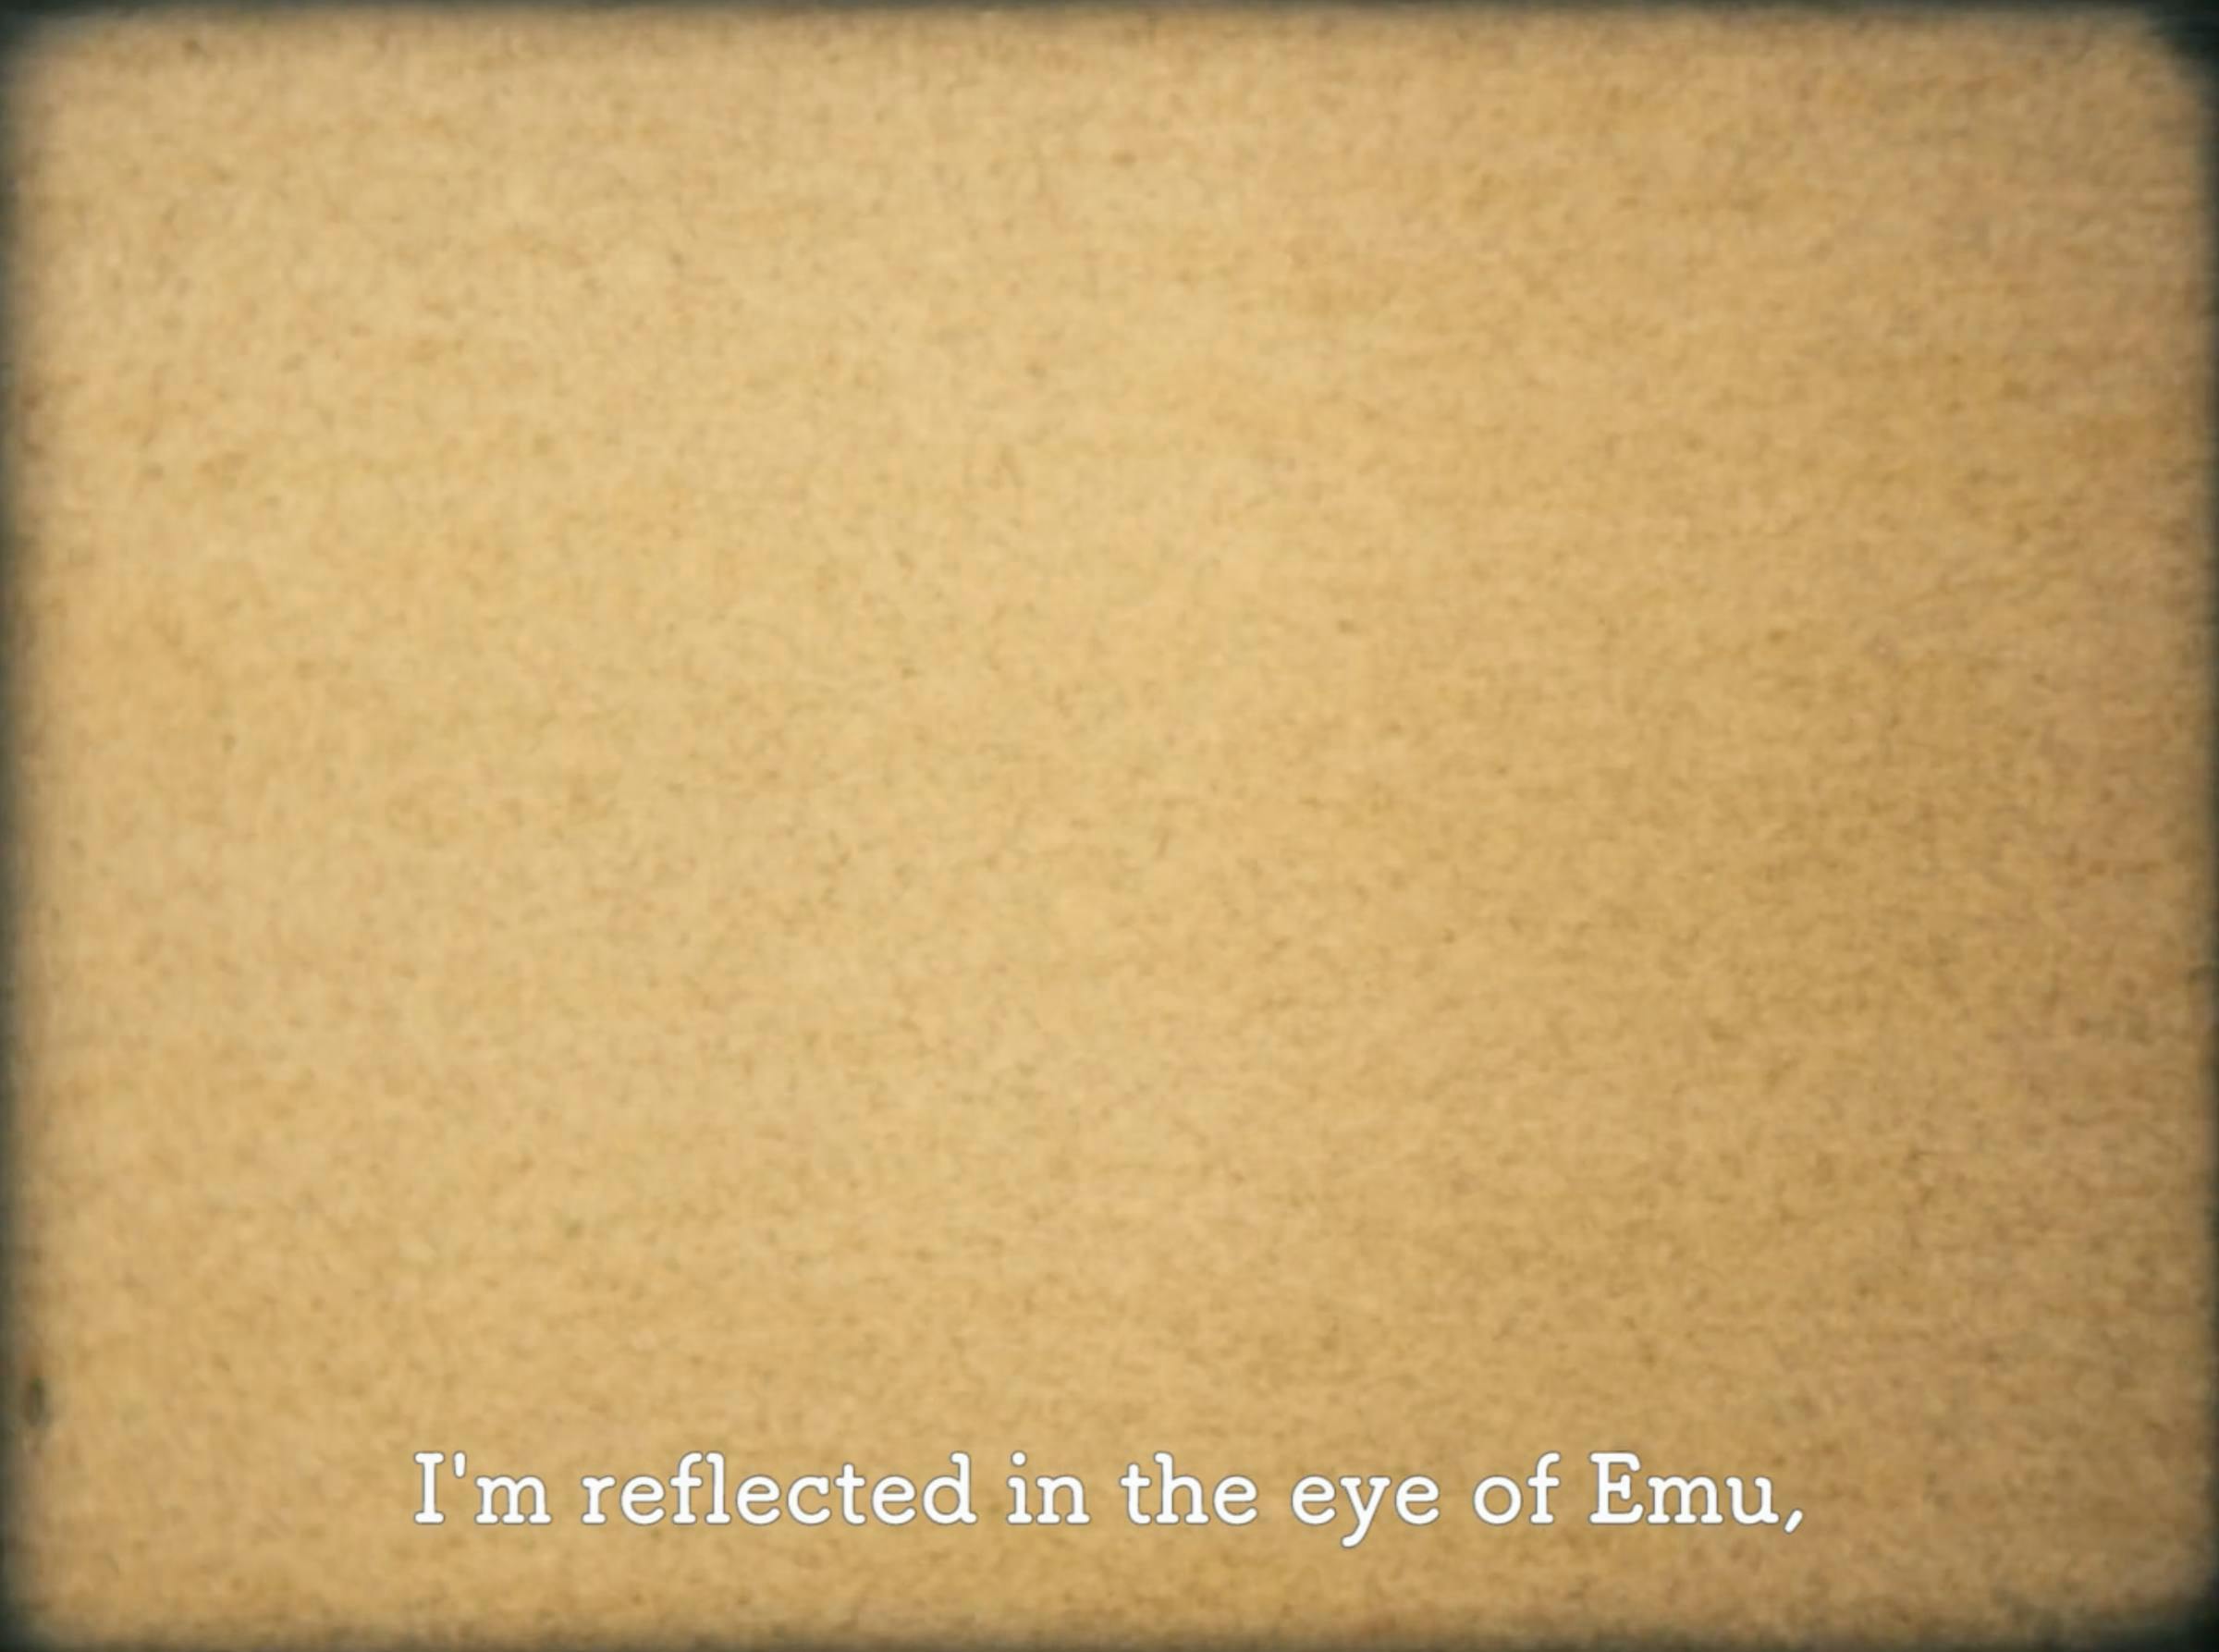 an image of an abstract object that is beige, we cannot discern what it is. A subtitle reads 'Im reflected in the eye of emu,'